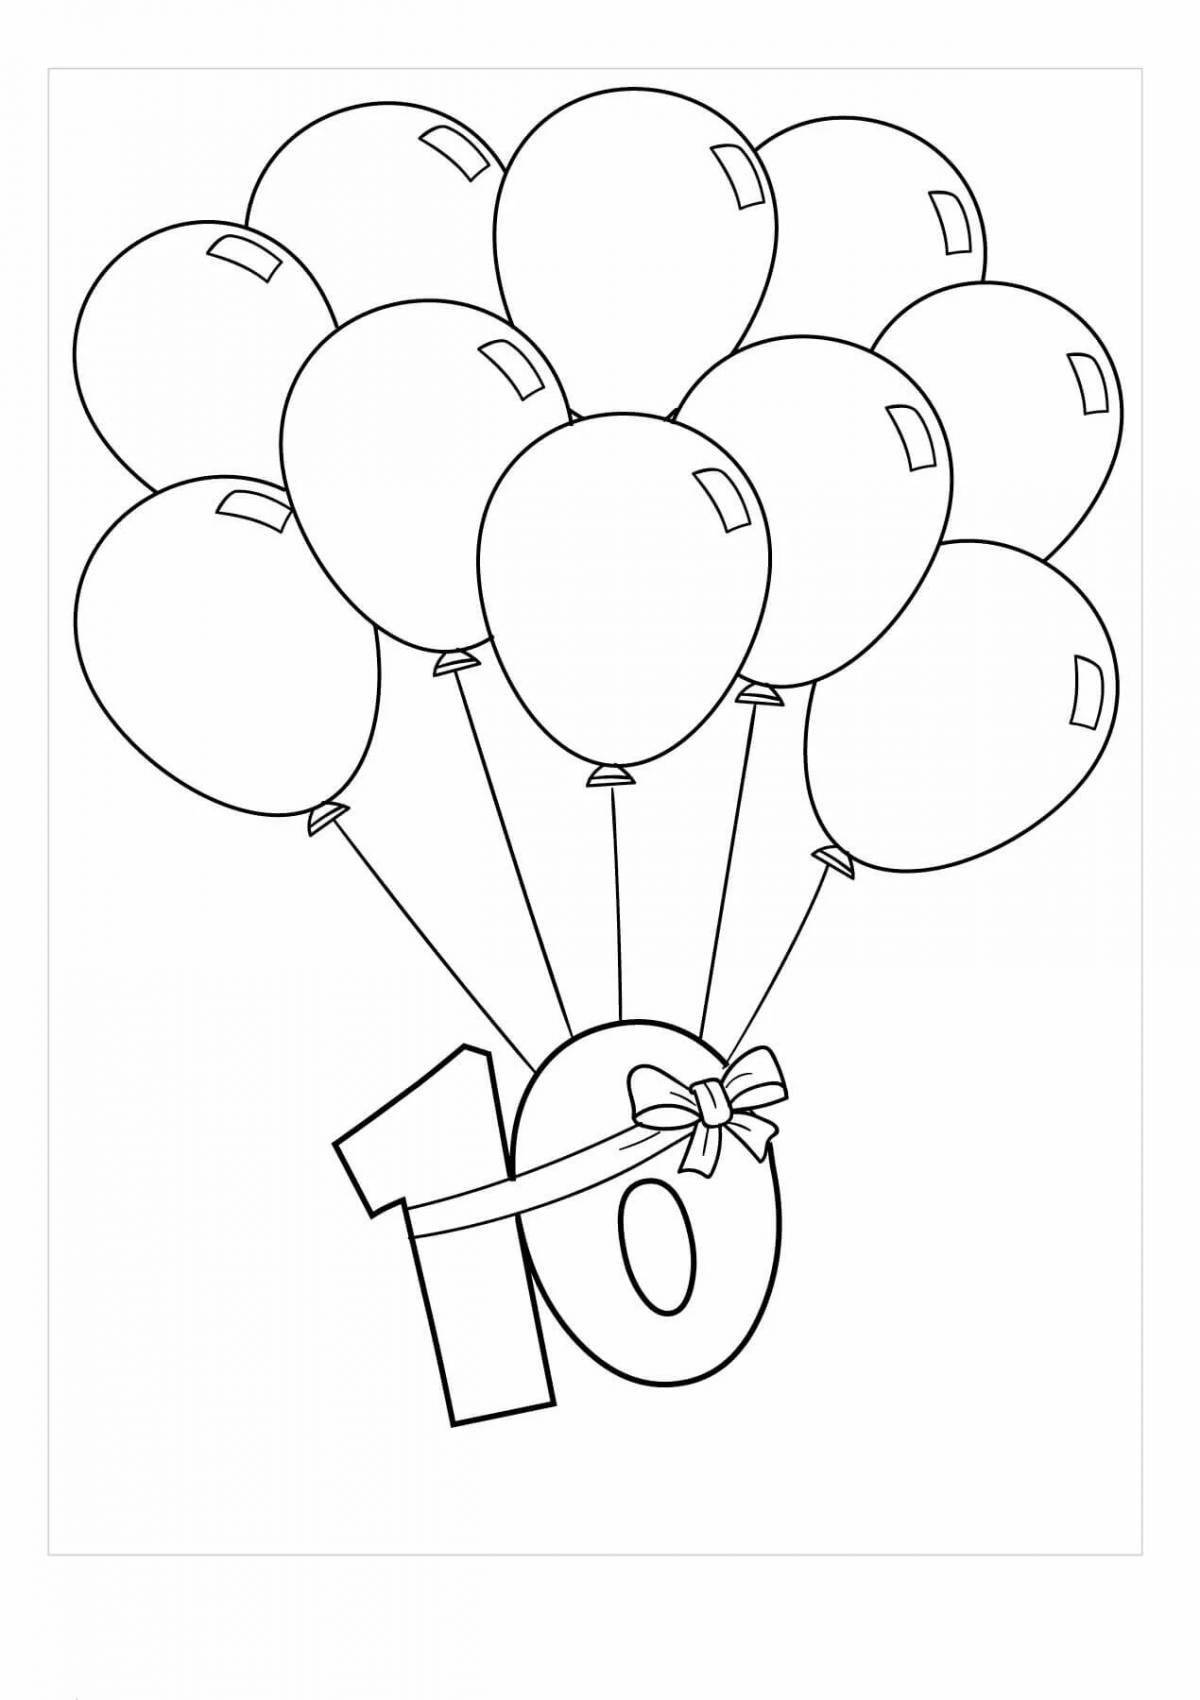 Playful coloring book with a ball for children 3-4 years old